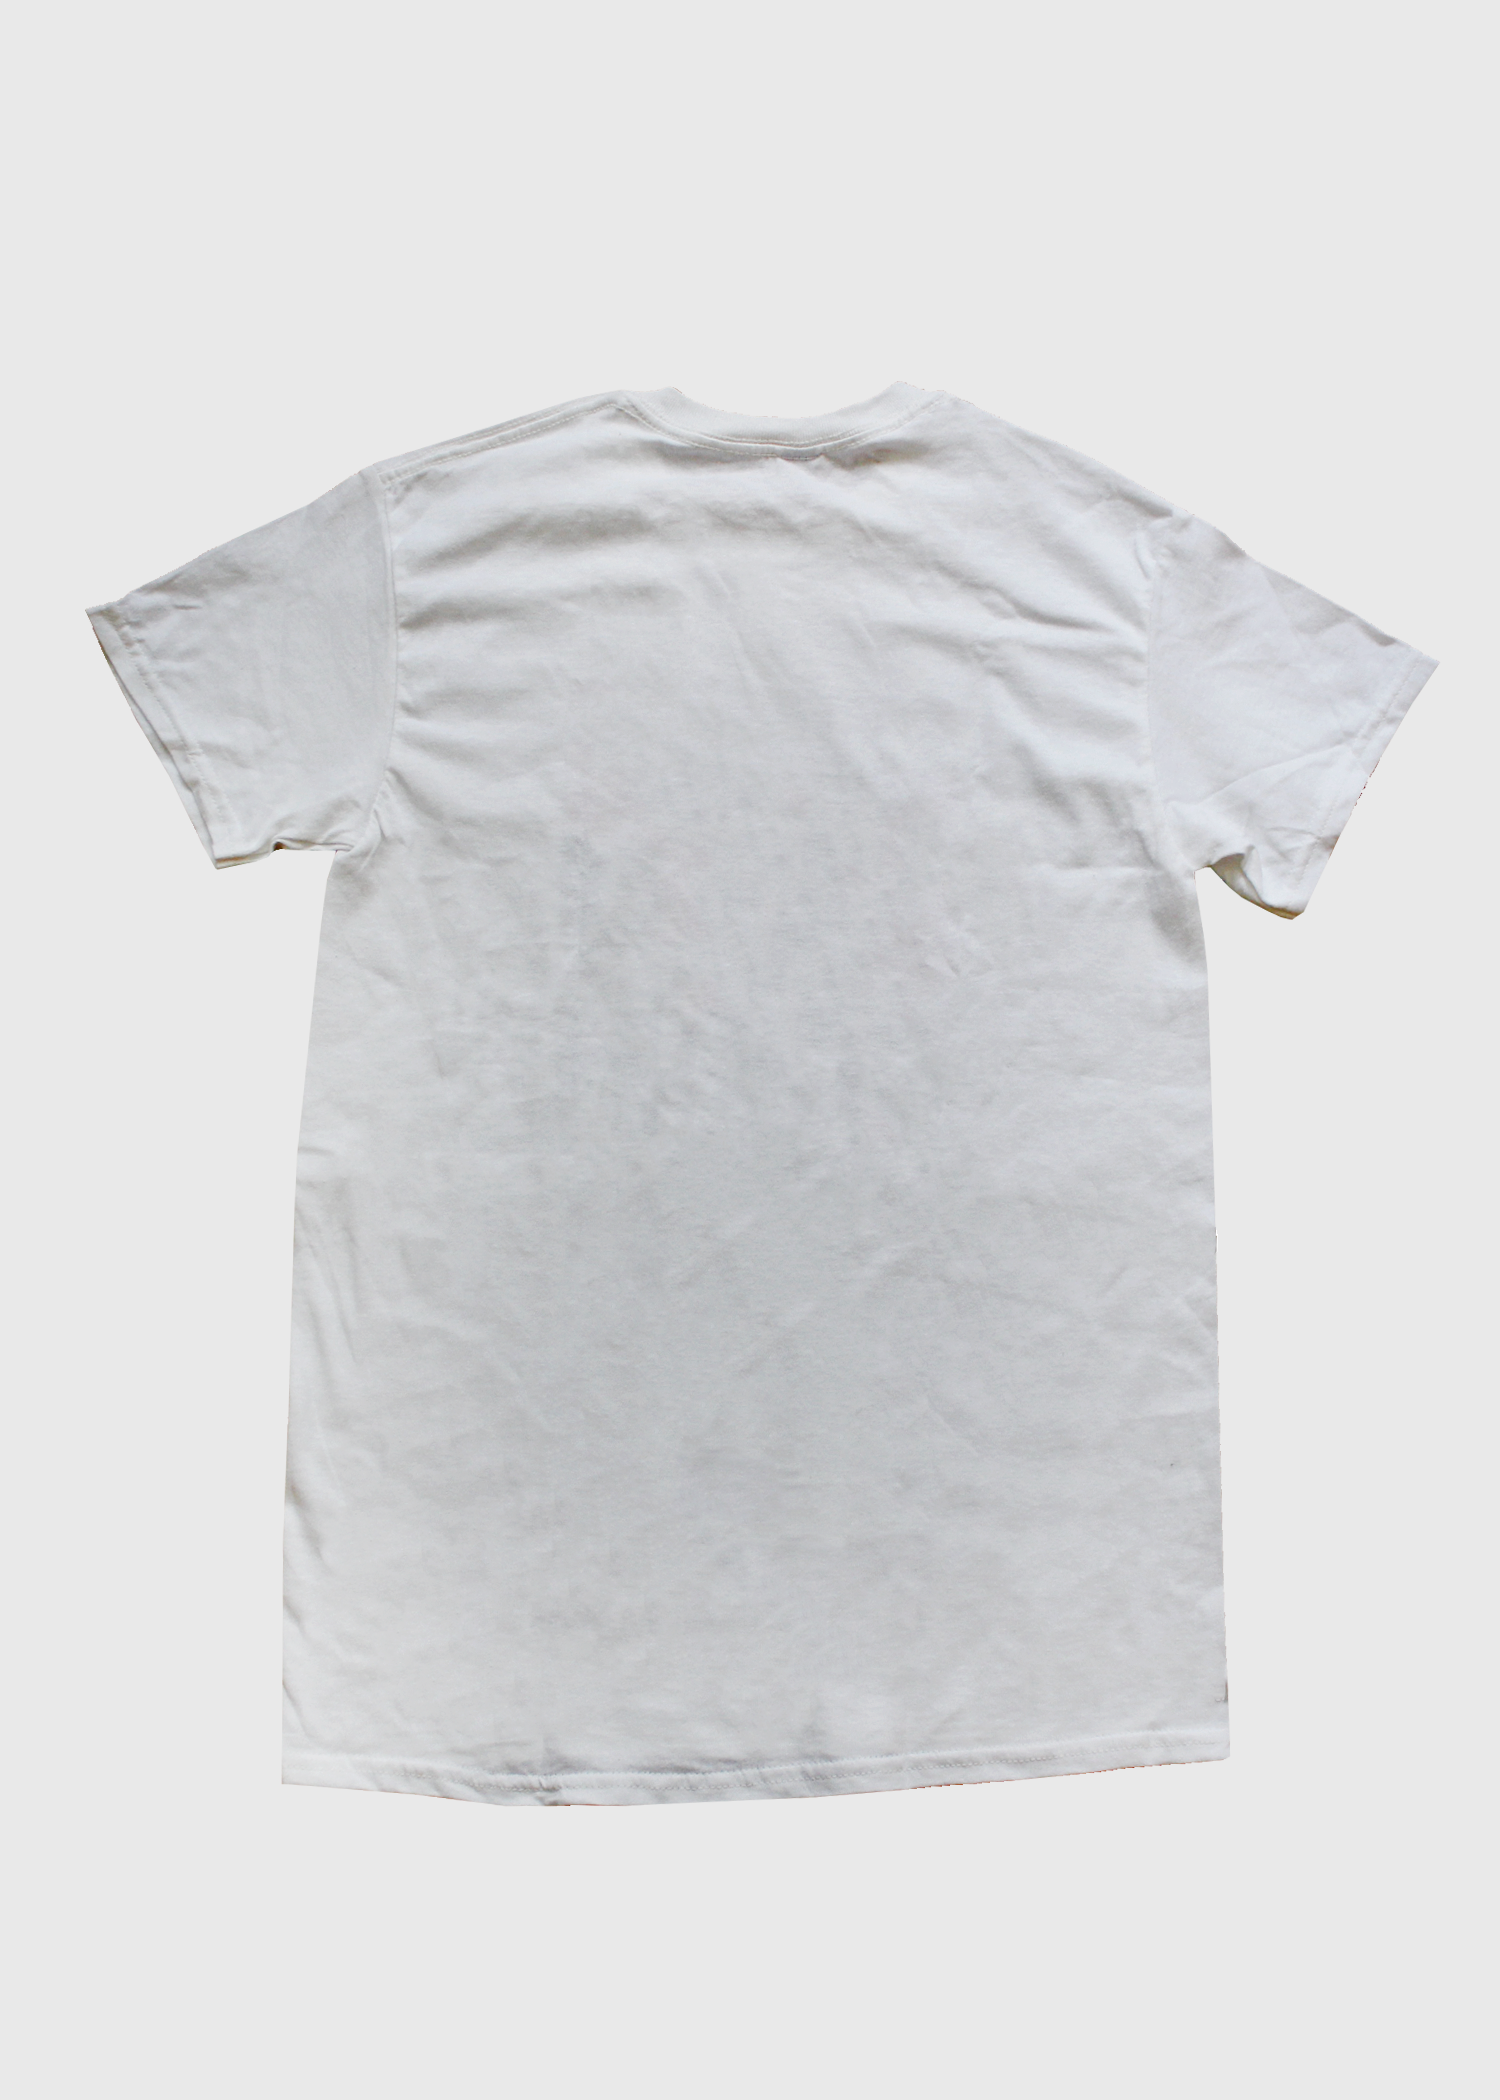 A back view of the white t-shirt